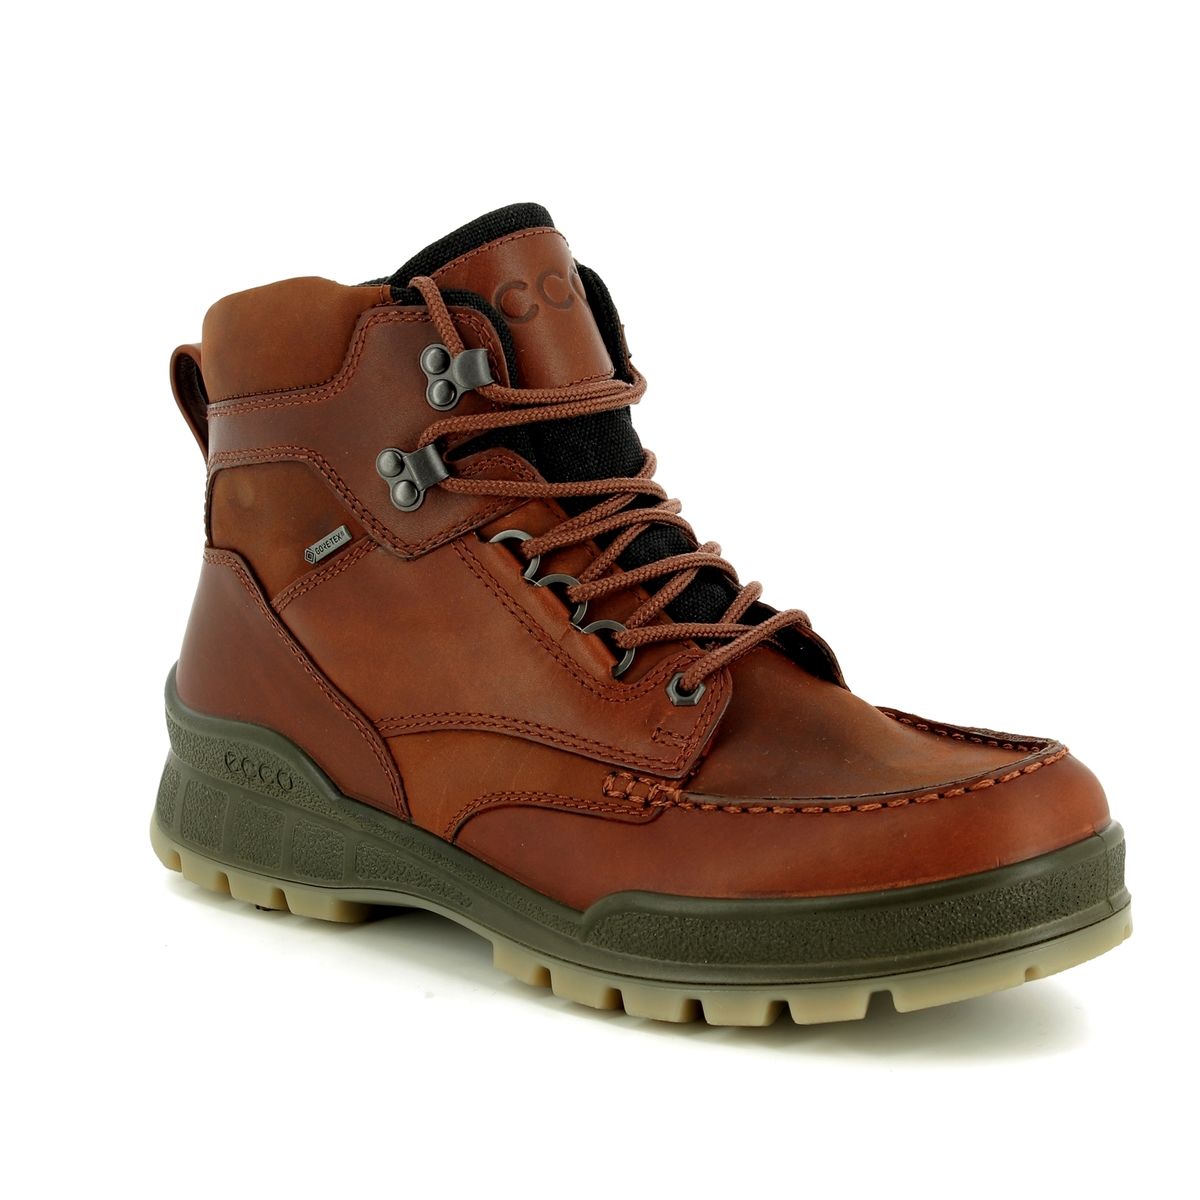 ECCO Track 25 Boot Brown multi Mens Outdoor Walking Boots 831704-52600 in a Plain Leather in Size 46